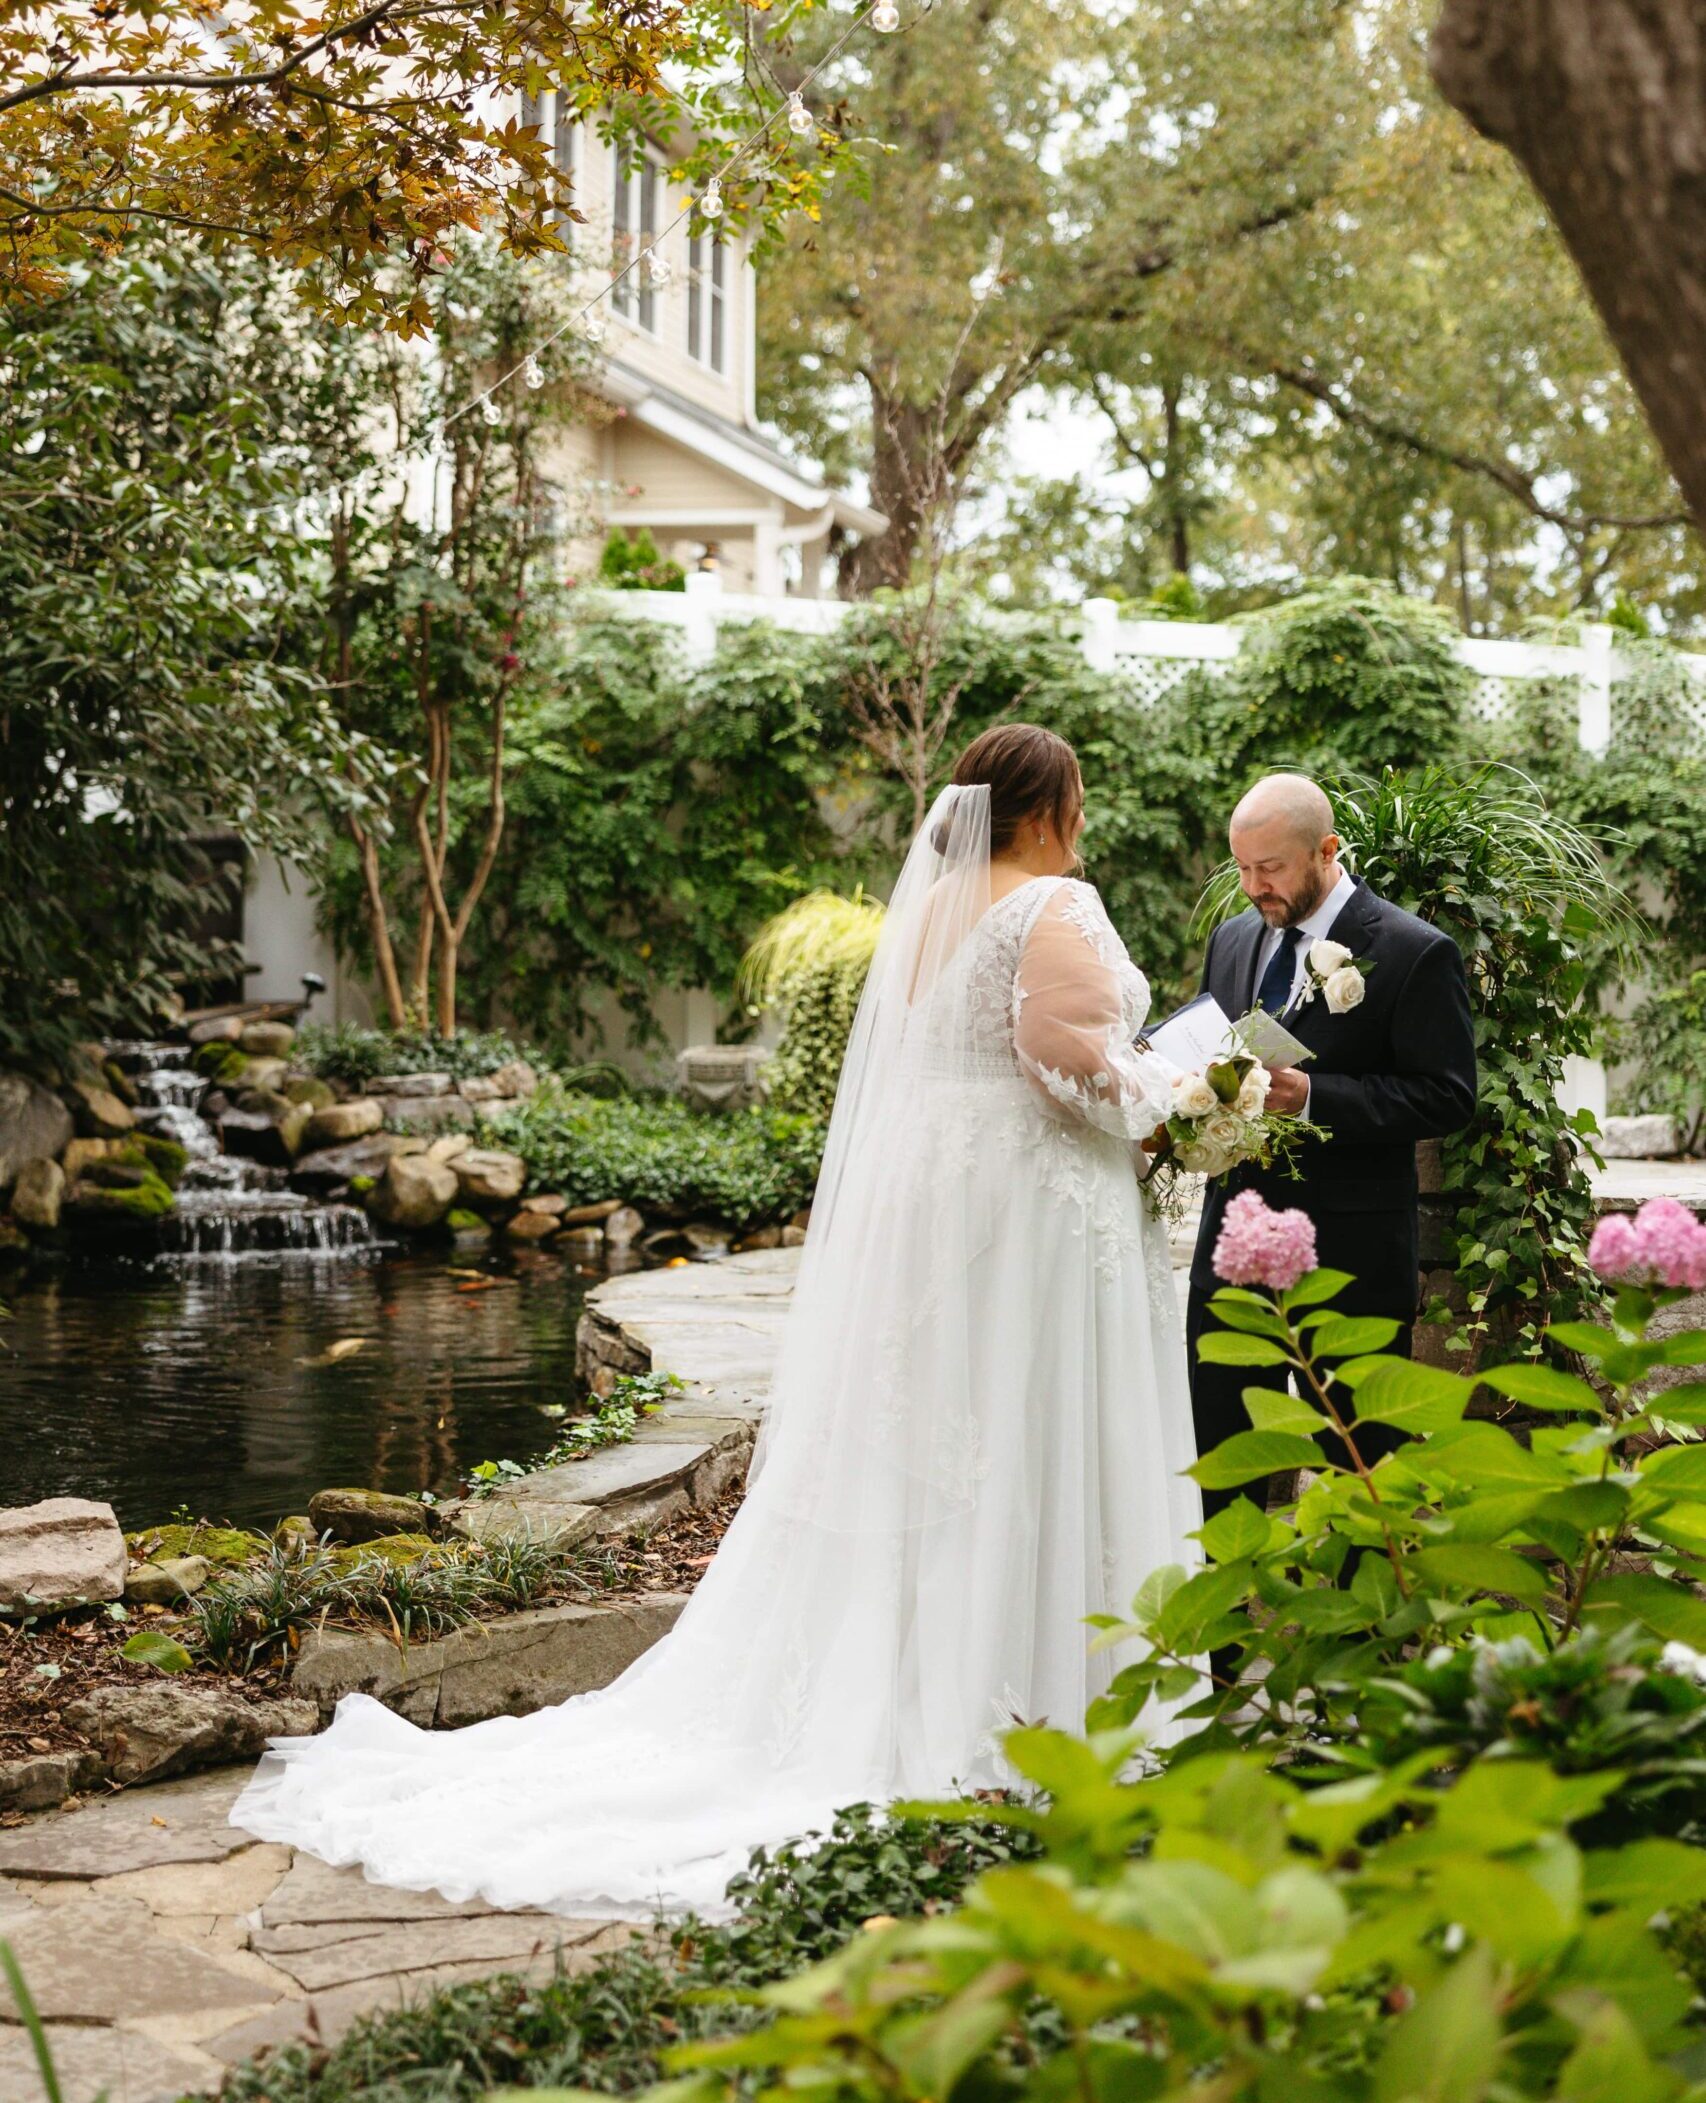 A bride and groom read private vows in the garden at CJ's off the Square in Nashville.